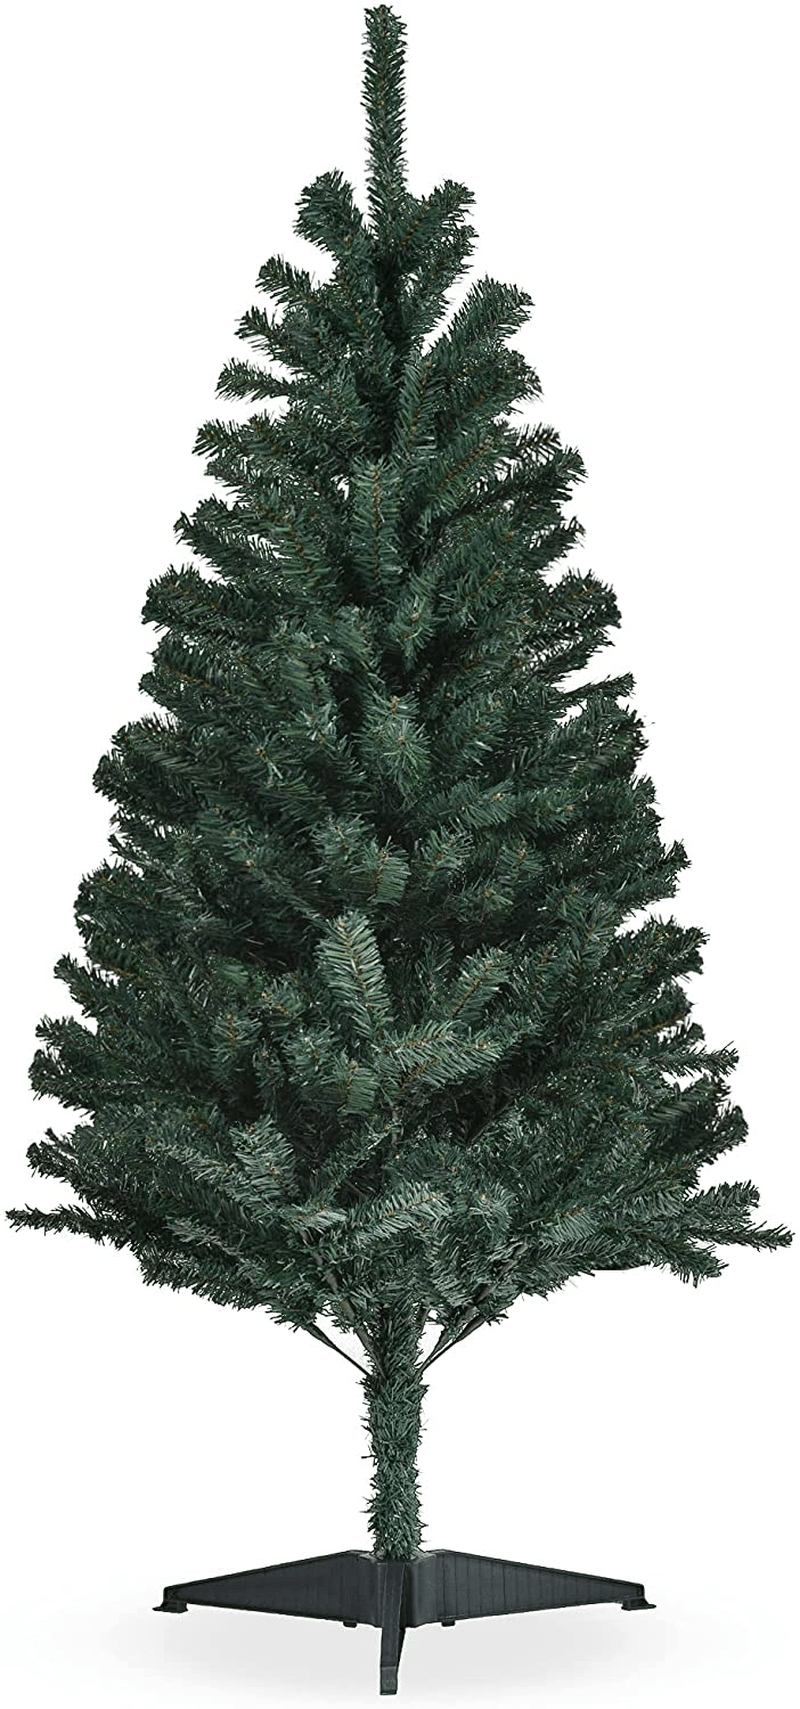 YEMODO Artificial Christmas Tree 4.5 Feet Christmas Pine Tree with Rubber Stand for Home, Office, Party，Christmas Decoration, Easy Assembly (New Green) Home & Garden > Decor > Seasonal & Holiday Decorations > Christmas Tree Stands YEMODO 4.5ft  